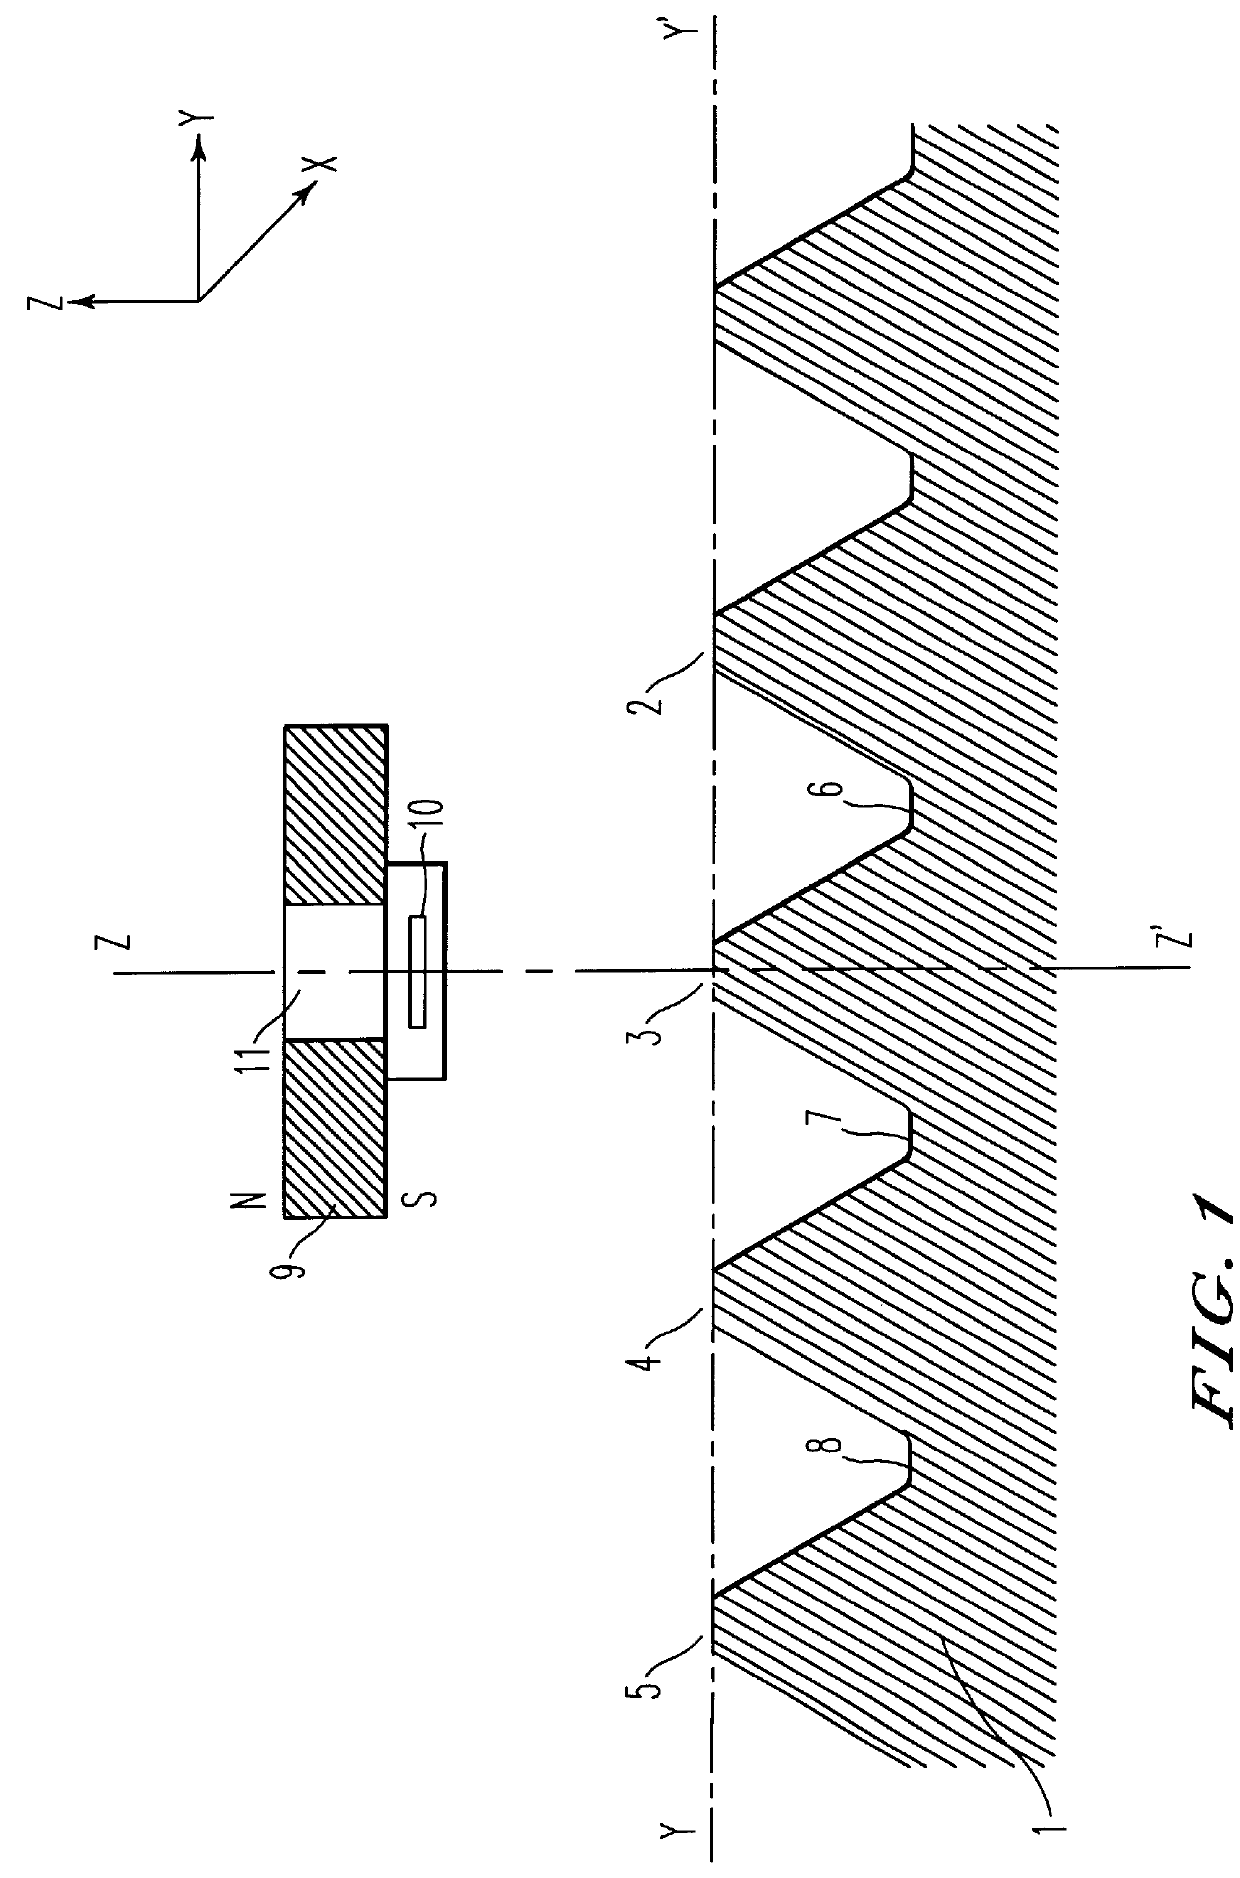 Incremental sensor of speed and/or position for detecting low and null speeds